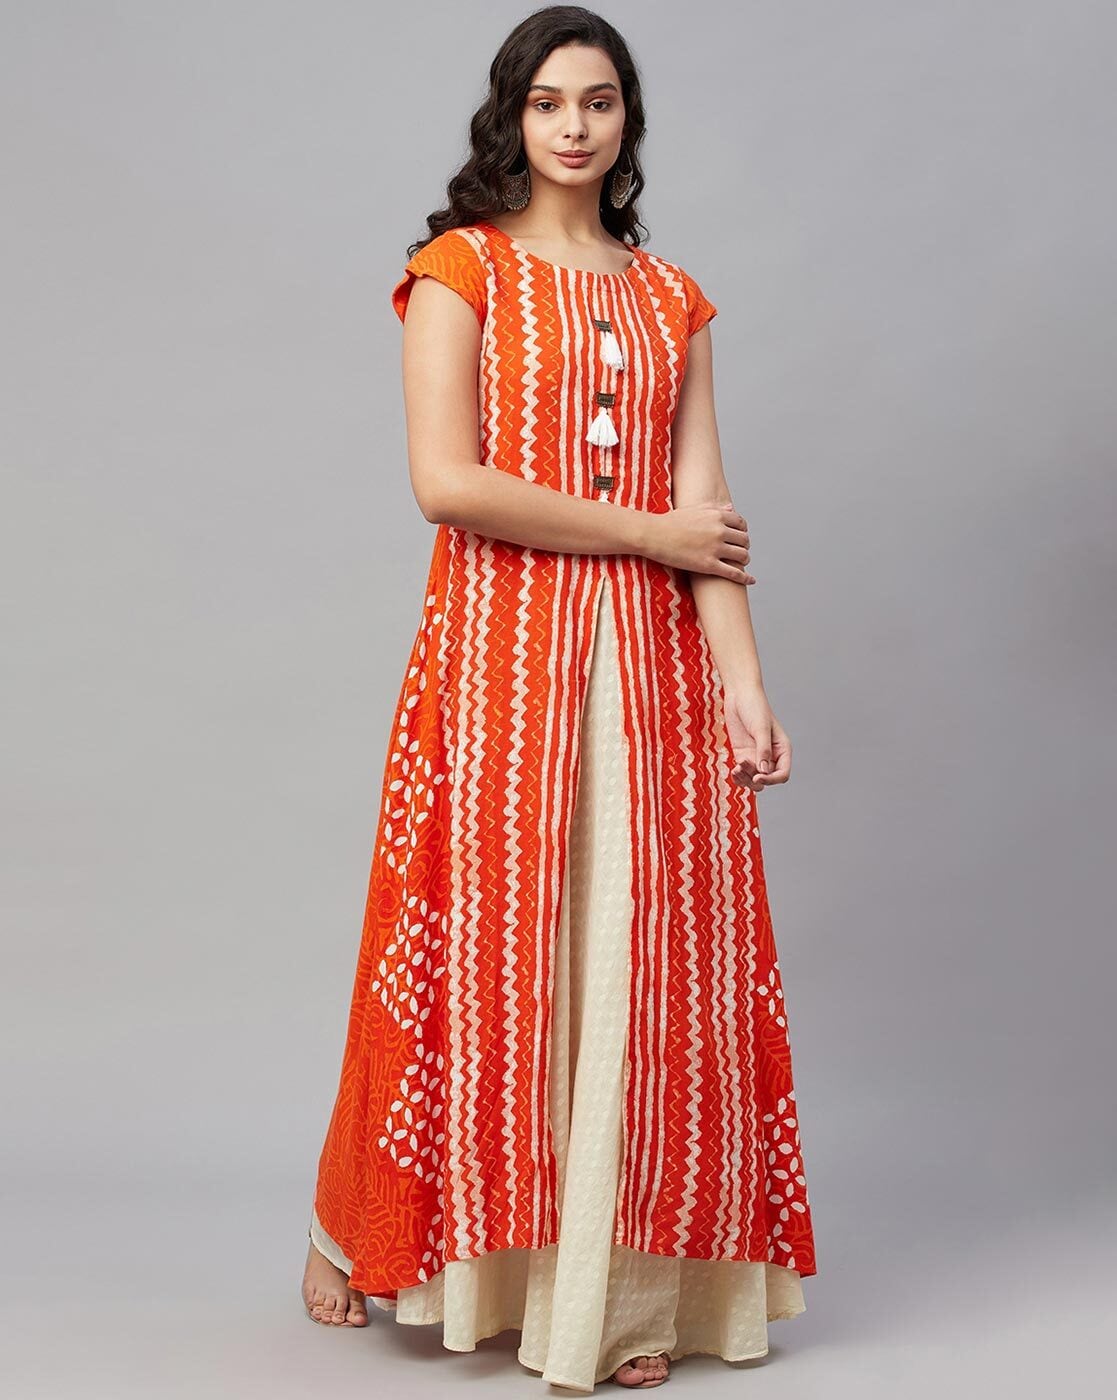 Source Pakistani Indian party wear wedding or casual women dresses new  arrivals on m.alibaba.com